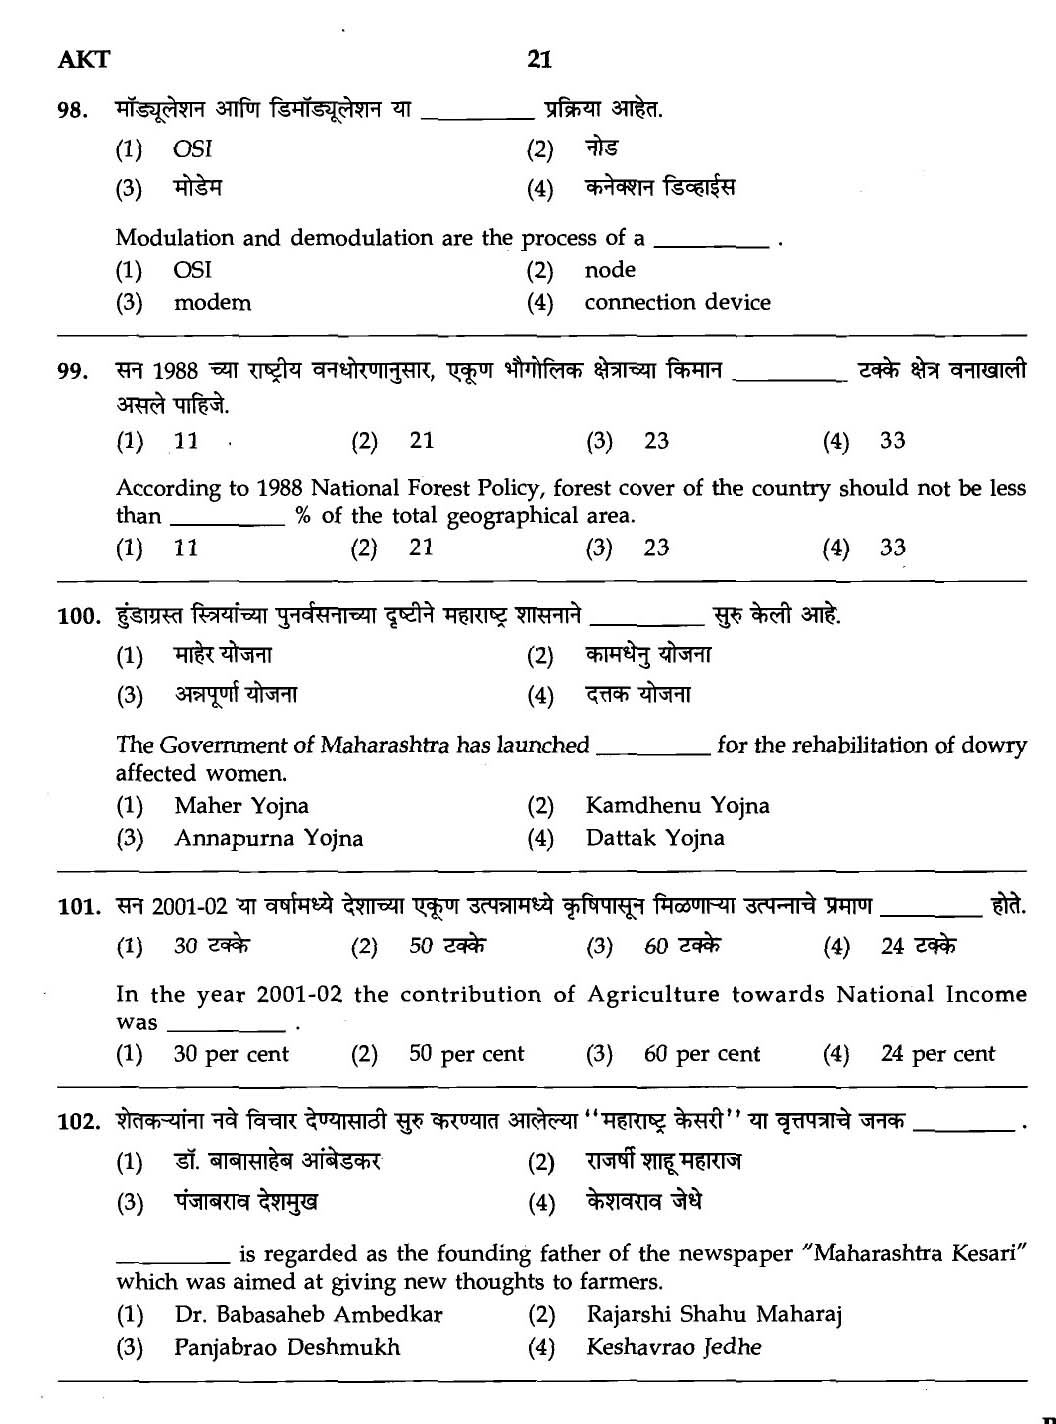 MPSC Agricultural Services Exam 2007 General Question Paper 19